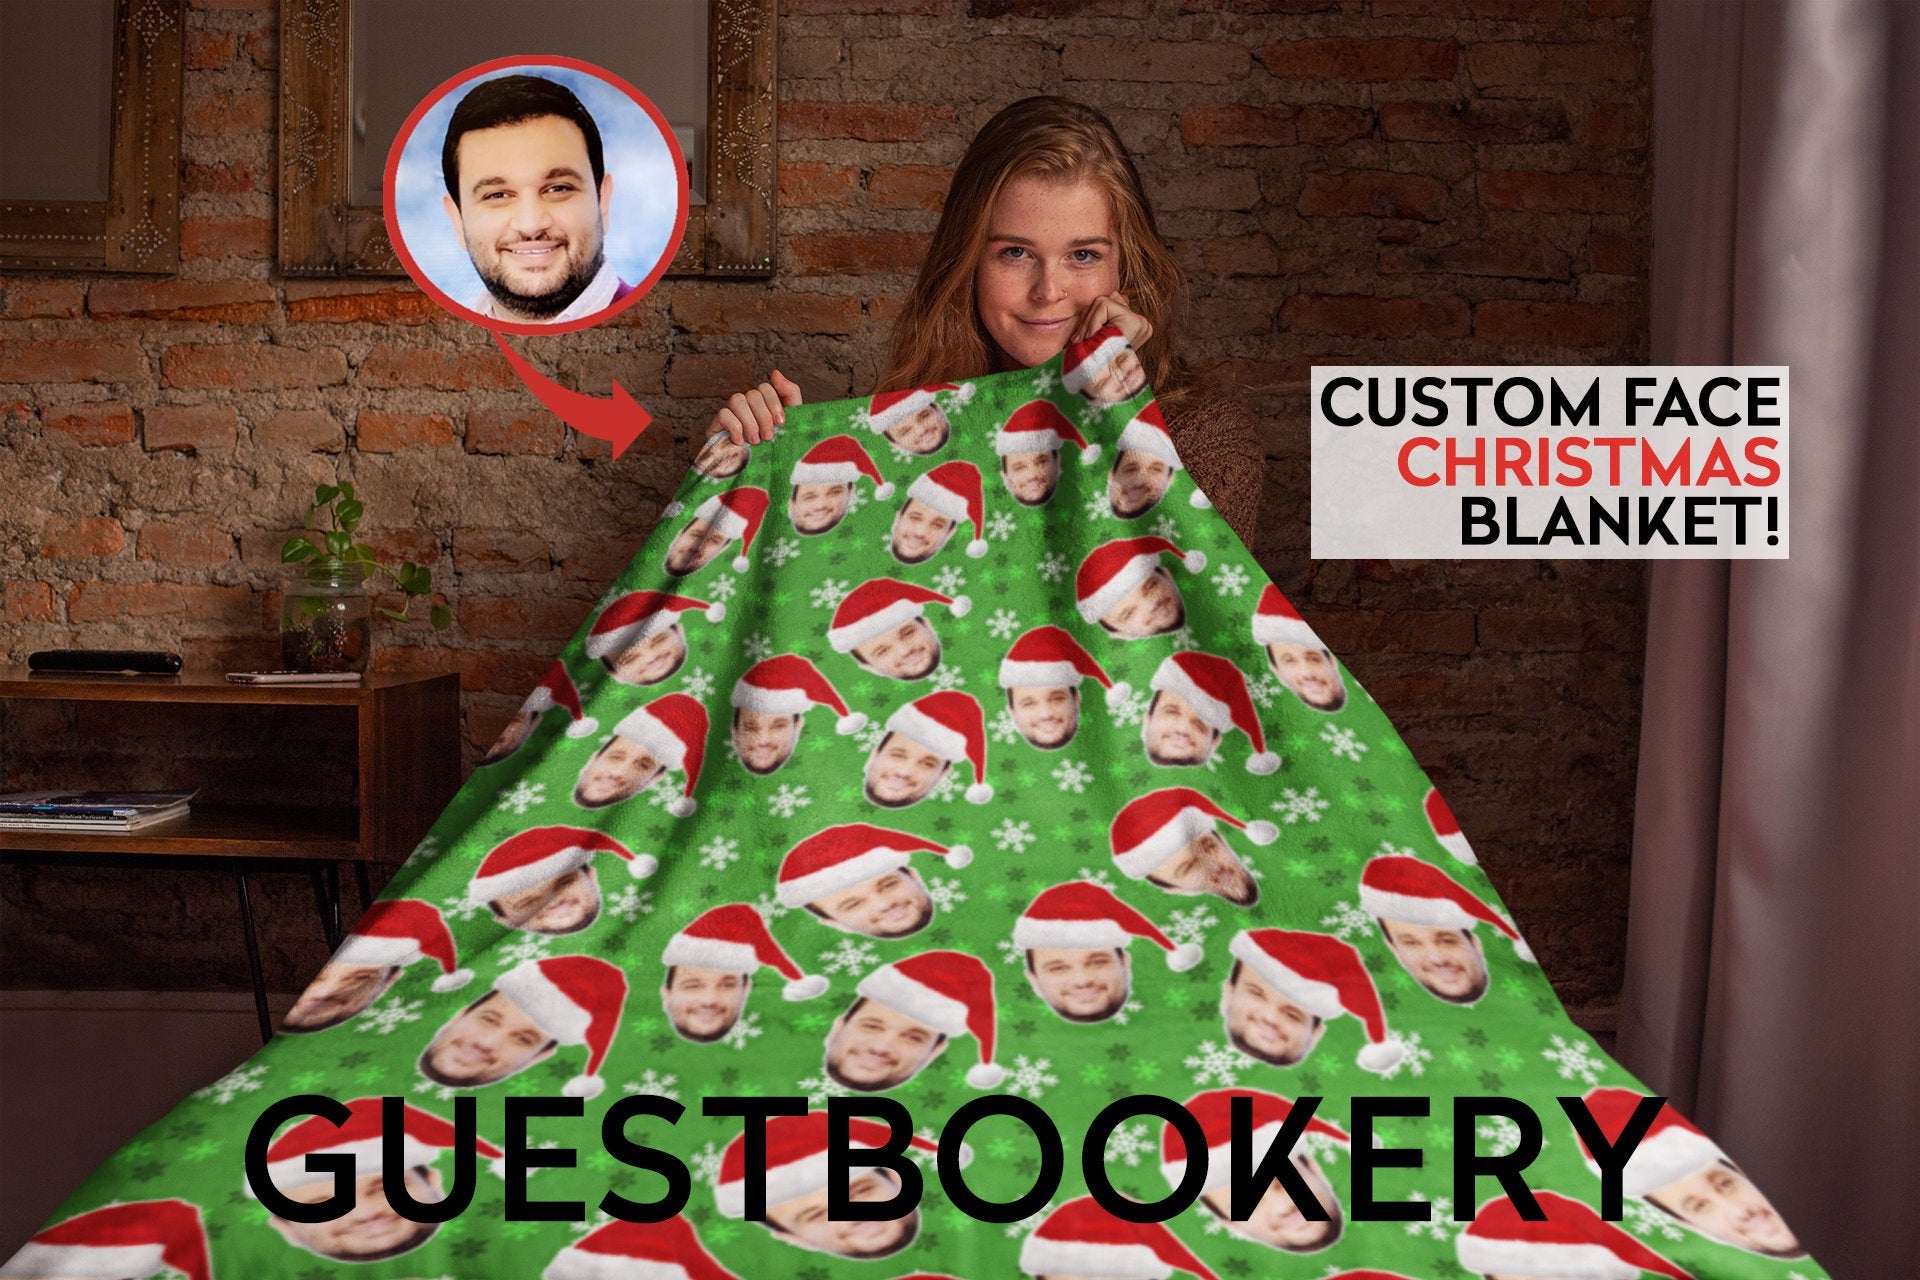 Custom Faces Christmas Blanket - Guestbookery